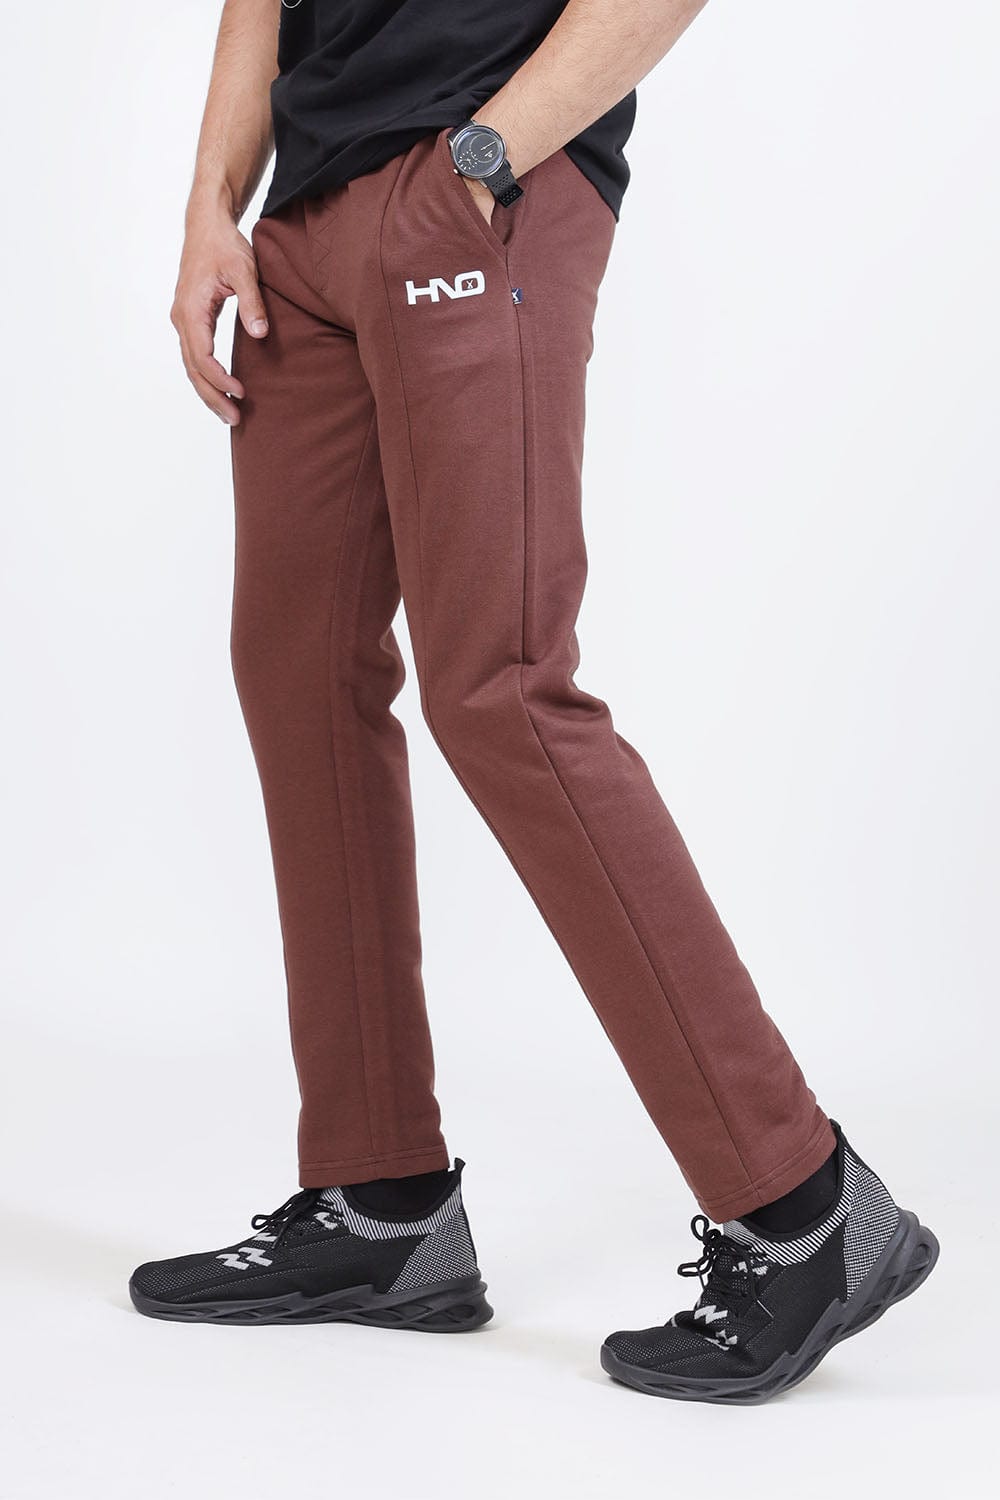 Hope Not Out by Shahid Afridi Men Trouser Brown Trouser With Hno Logo